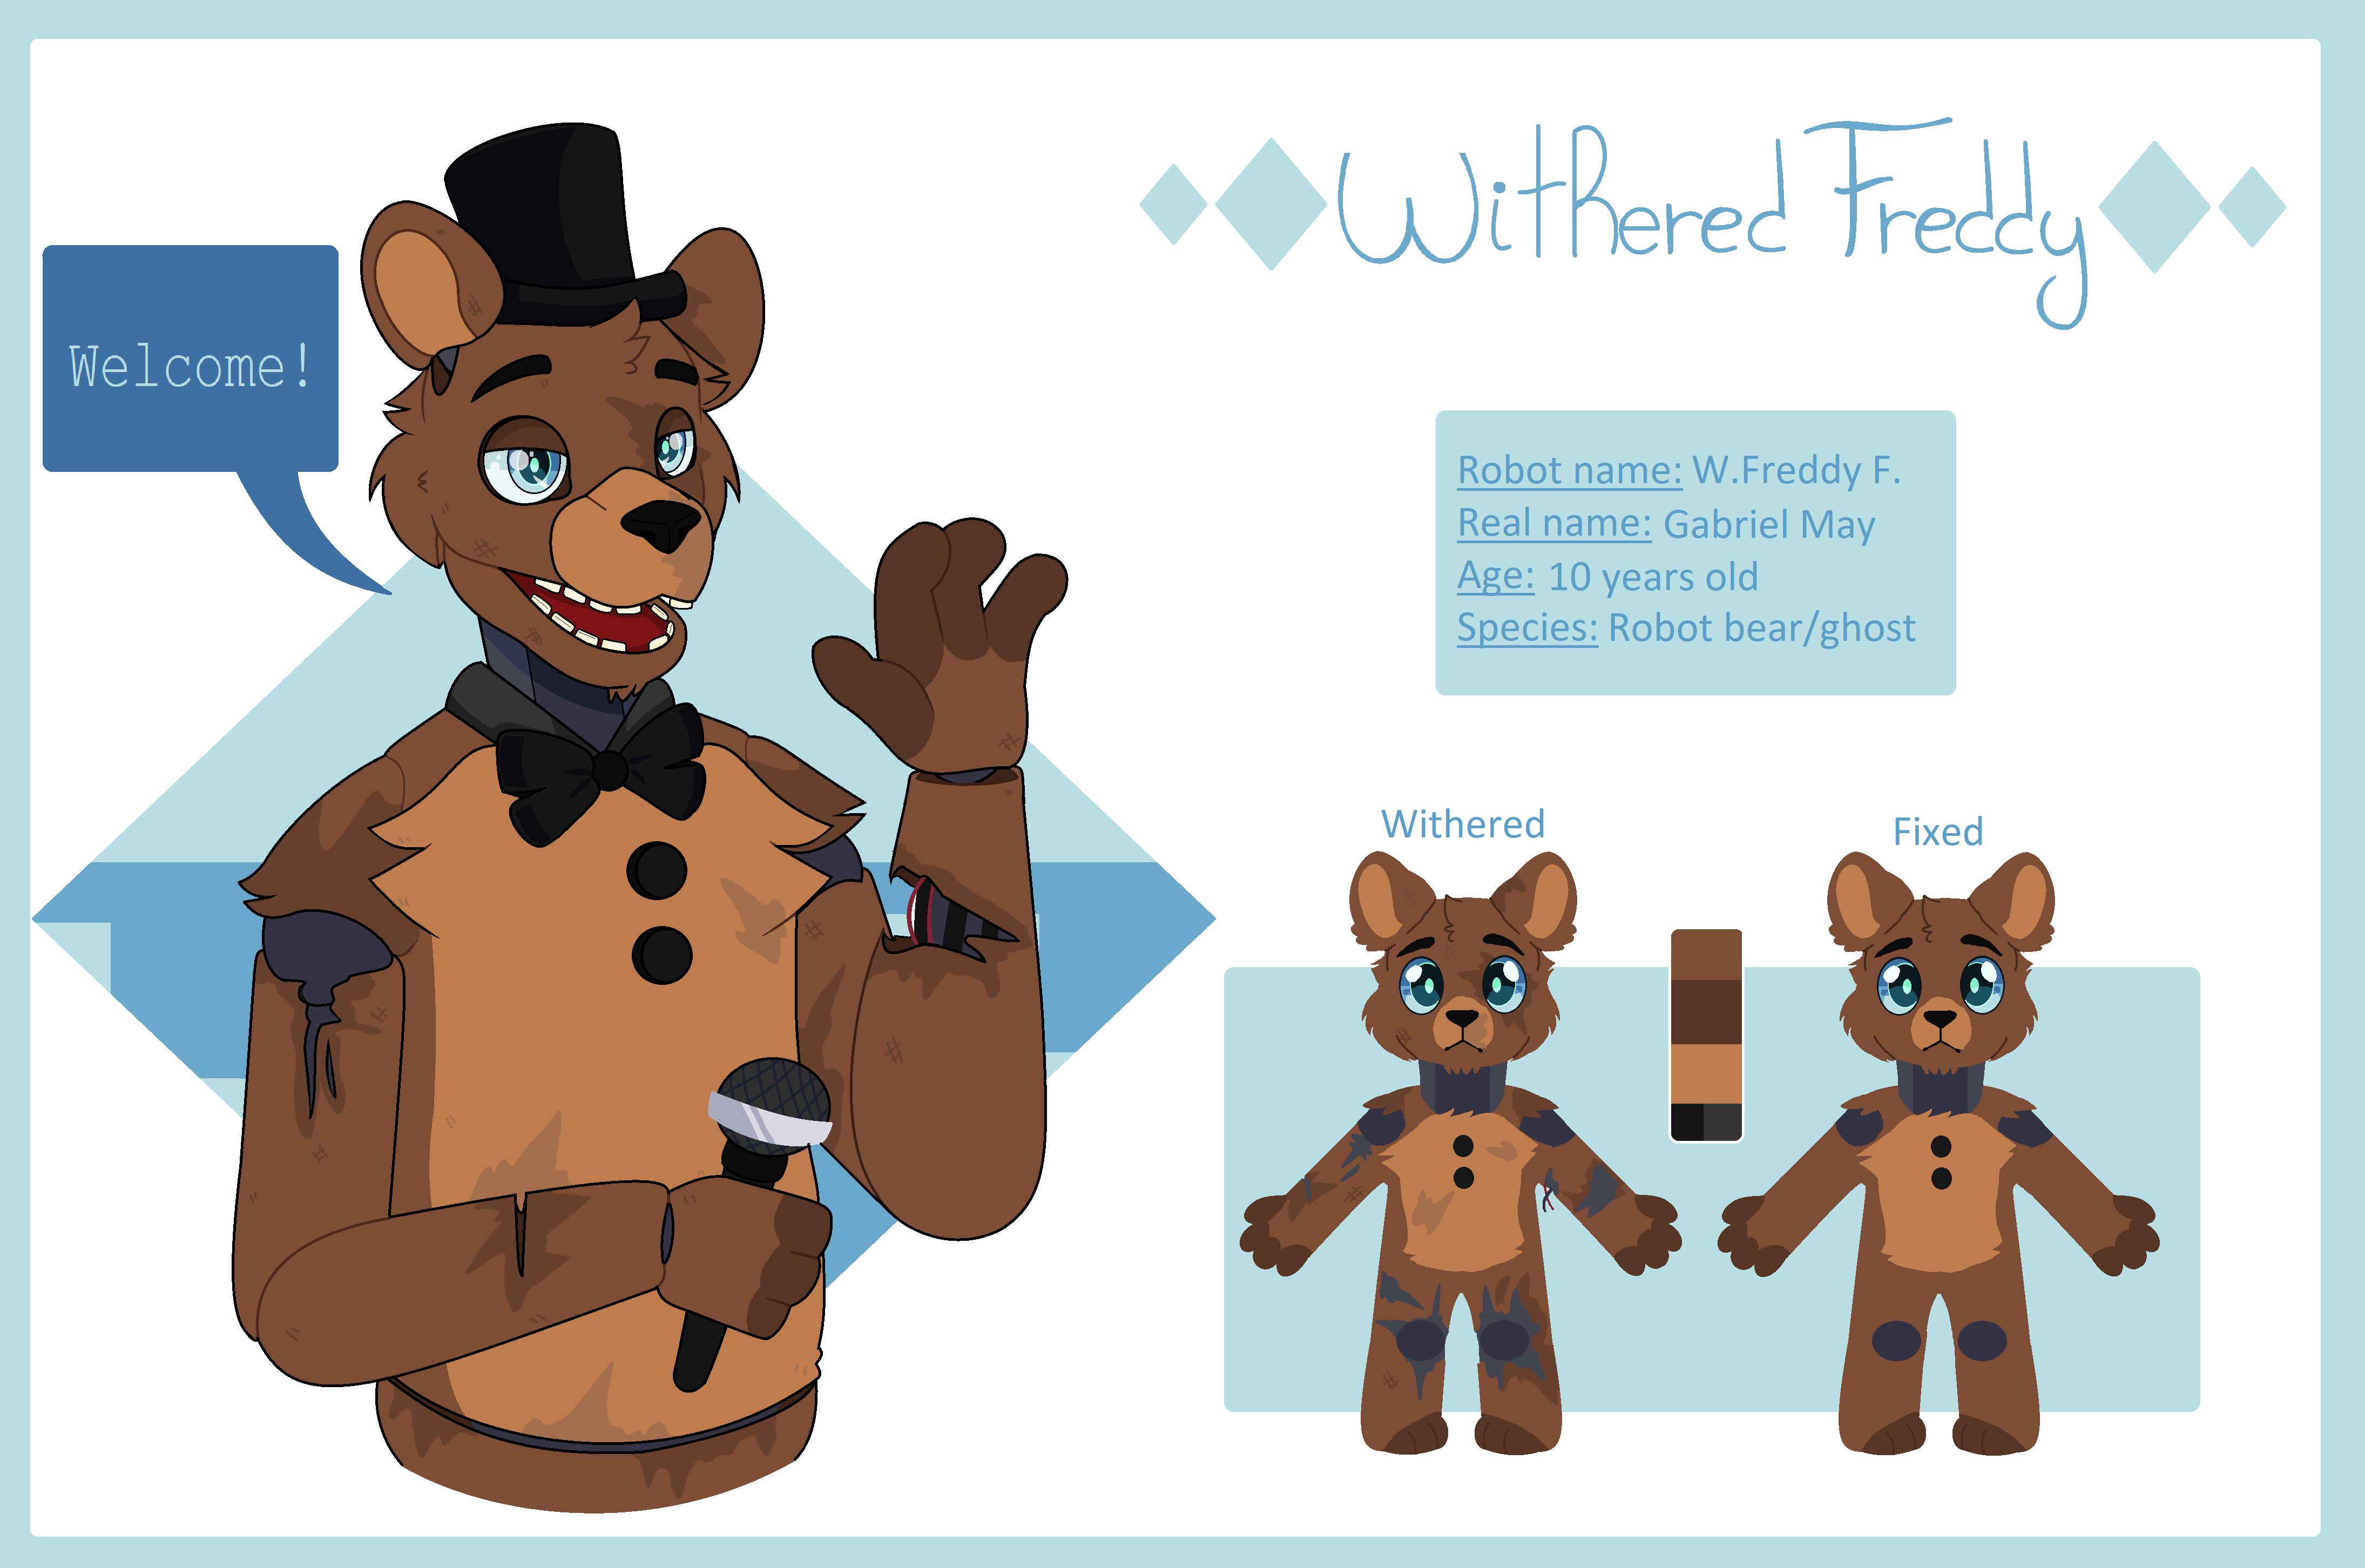 Fnaf Oc of Characters: Withered-Olivero by Gustavo5030 on DeviantArt